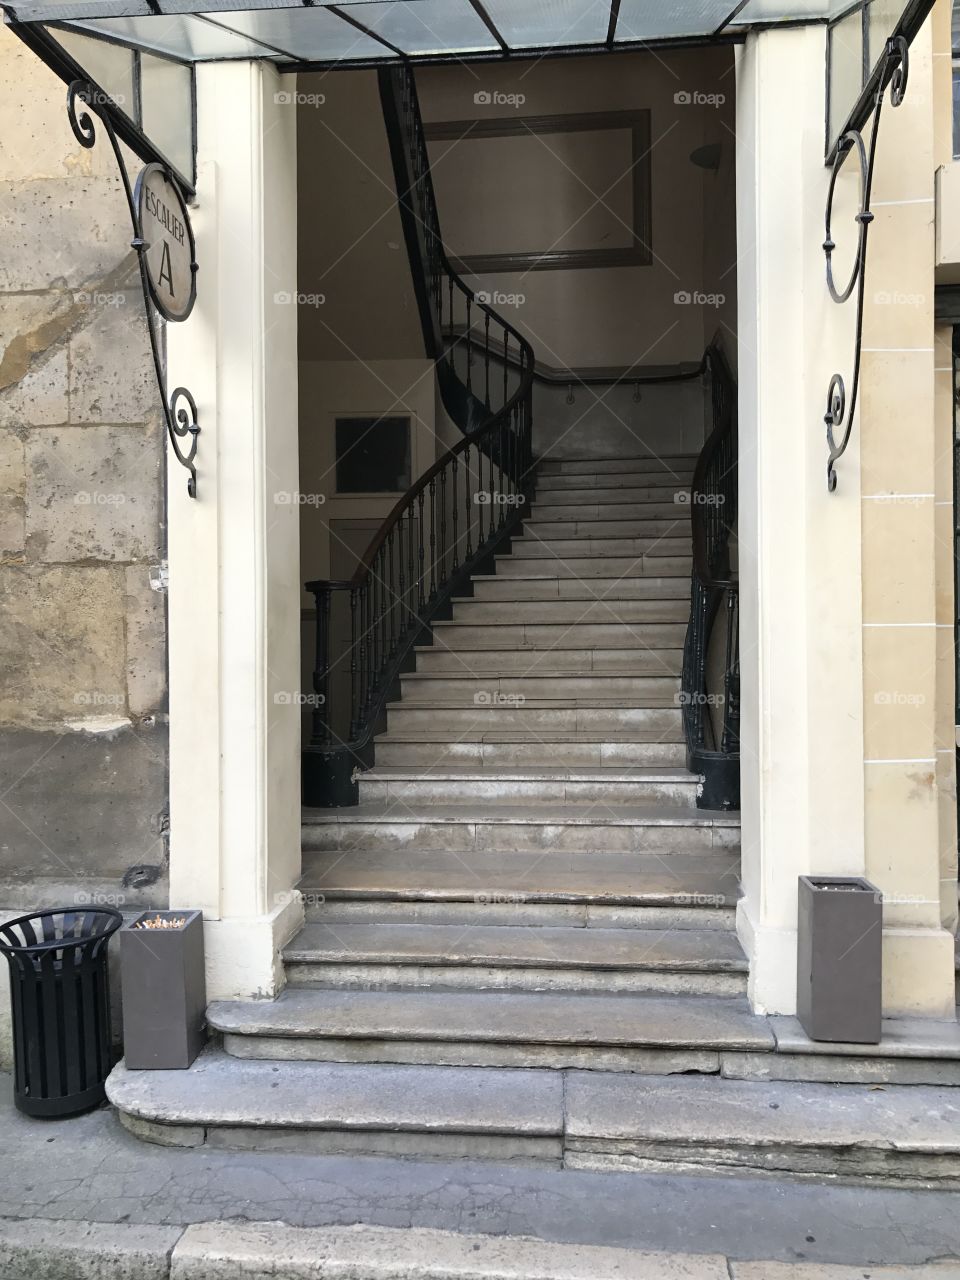 Stairs in Paris France 